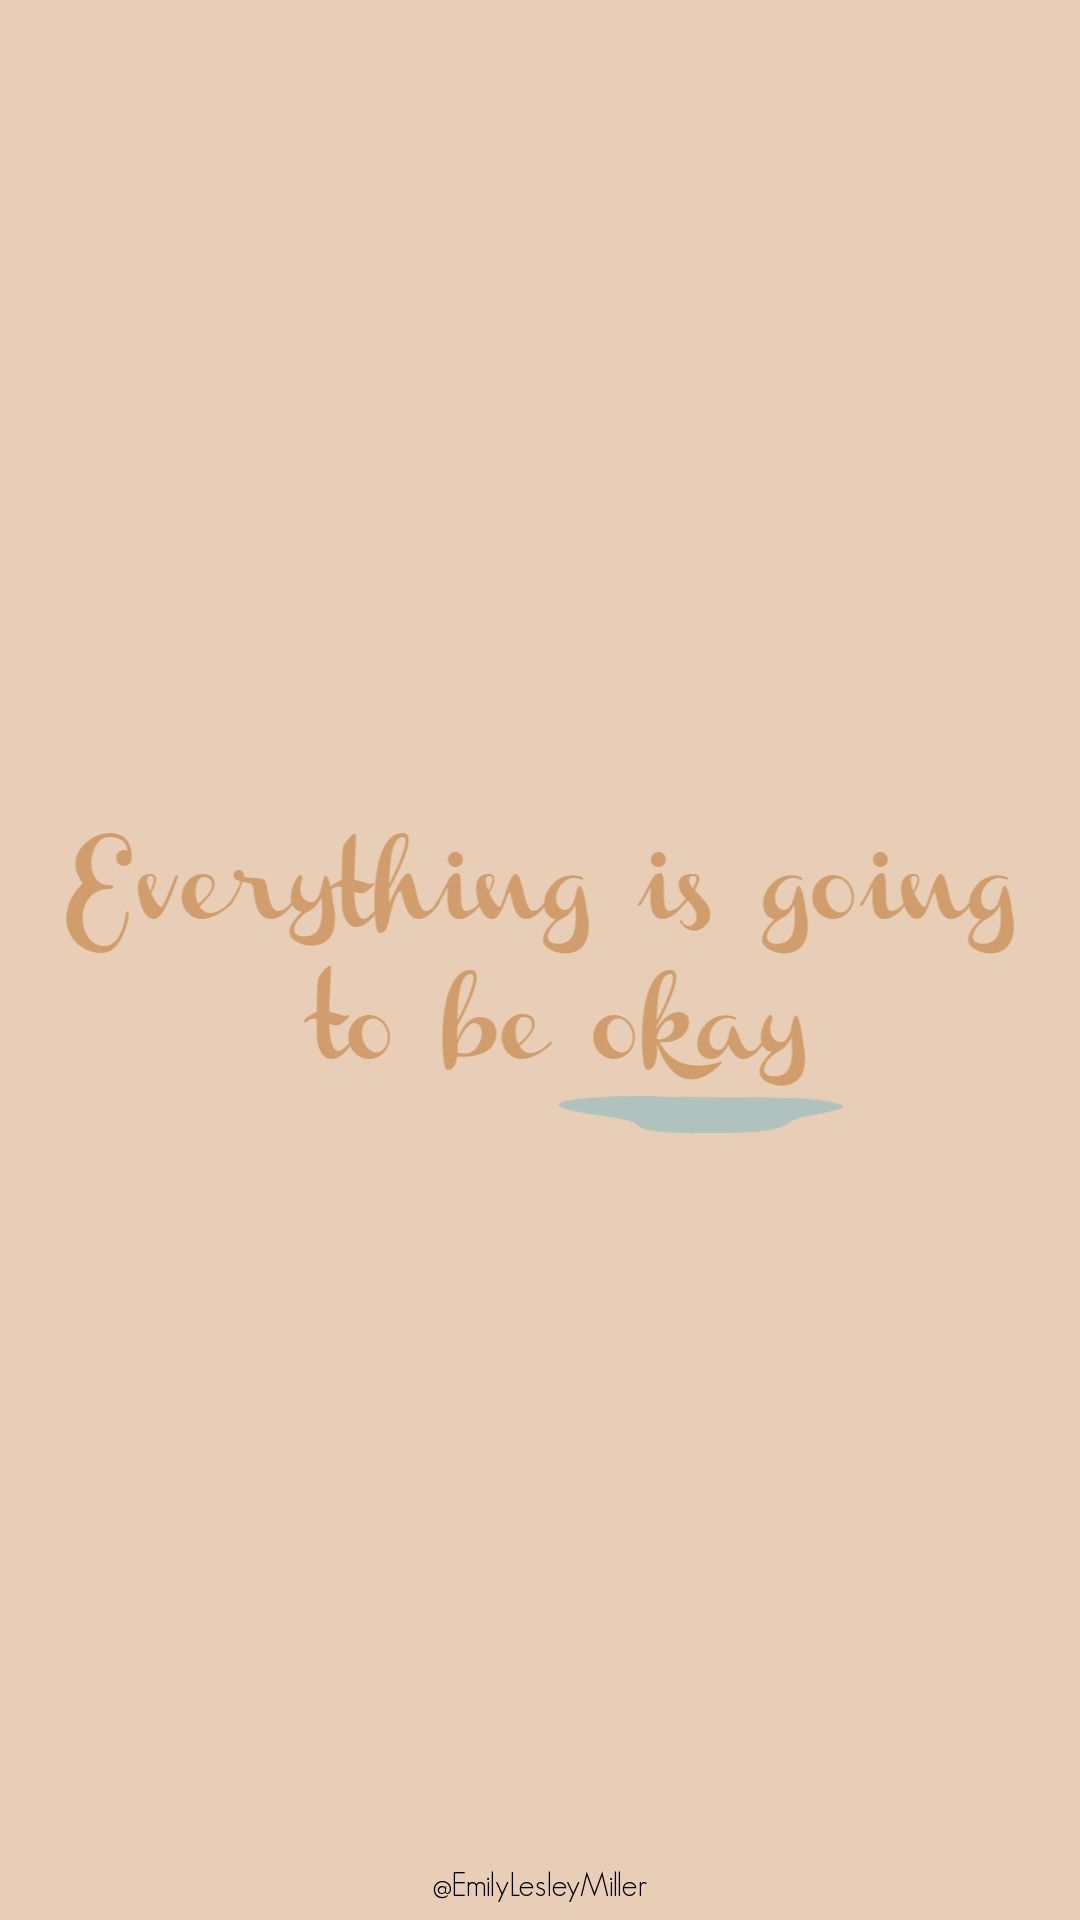 Everything Is Going To Be Okay Wallpaper Lesley Miller. Positive quotes, Wallpaper quotes, Pretty wallpaper